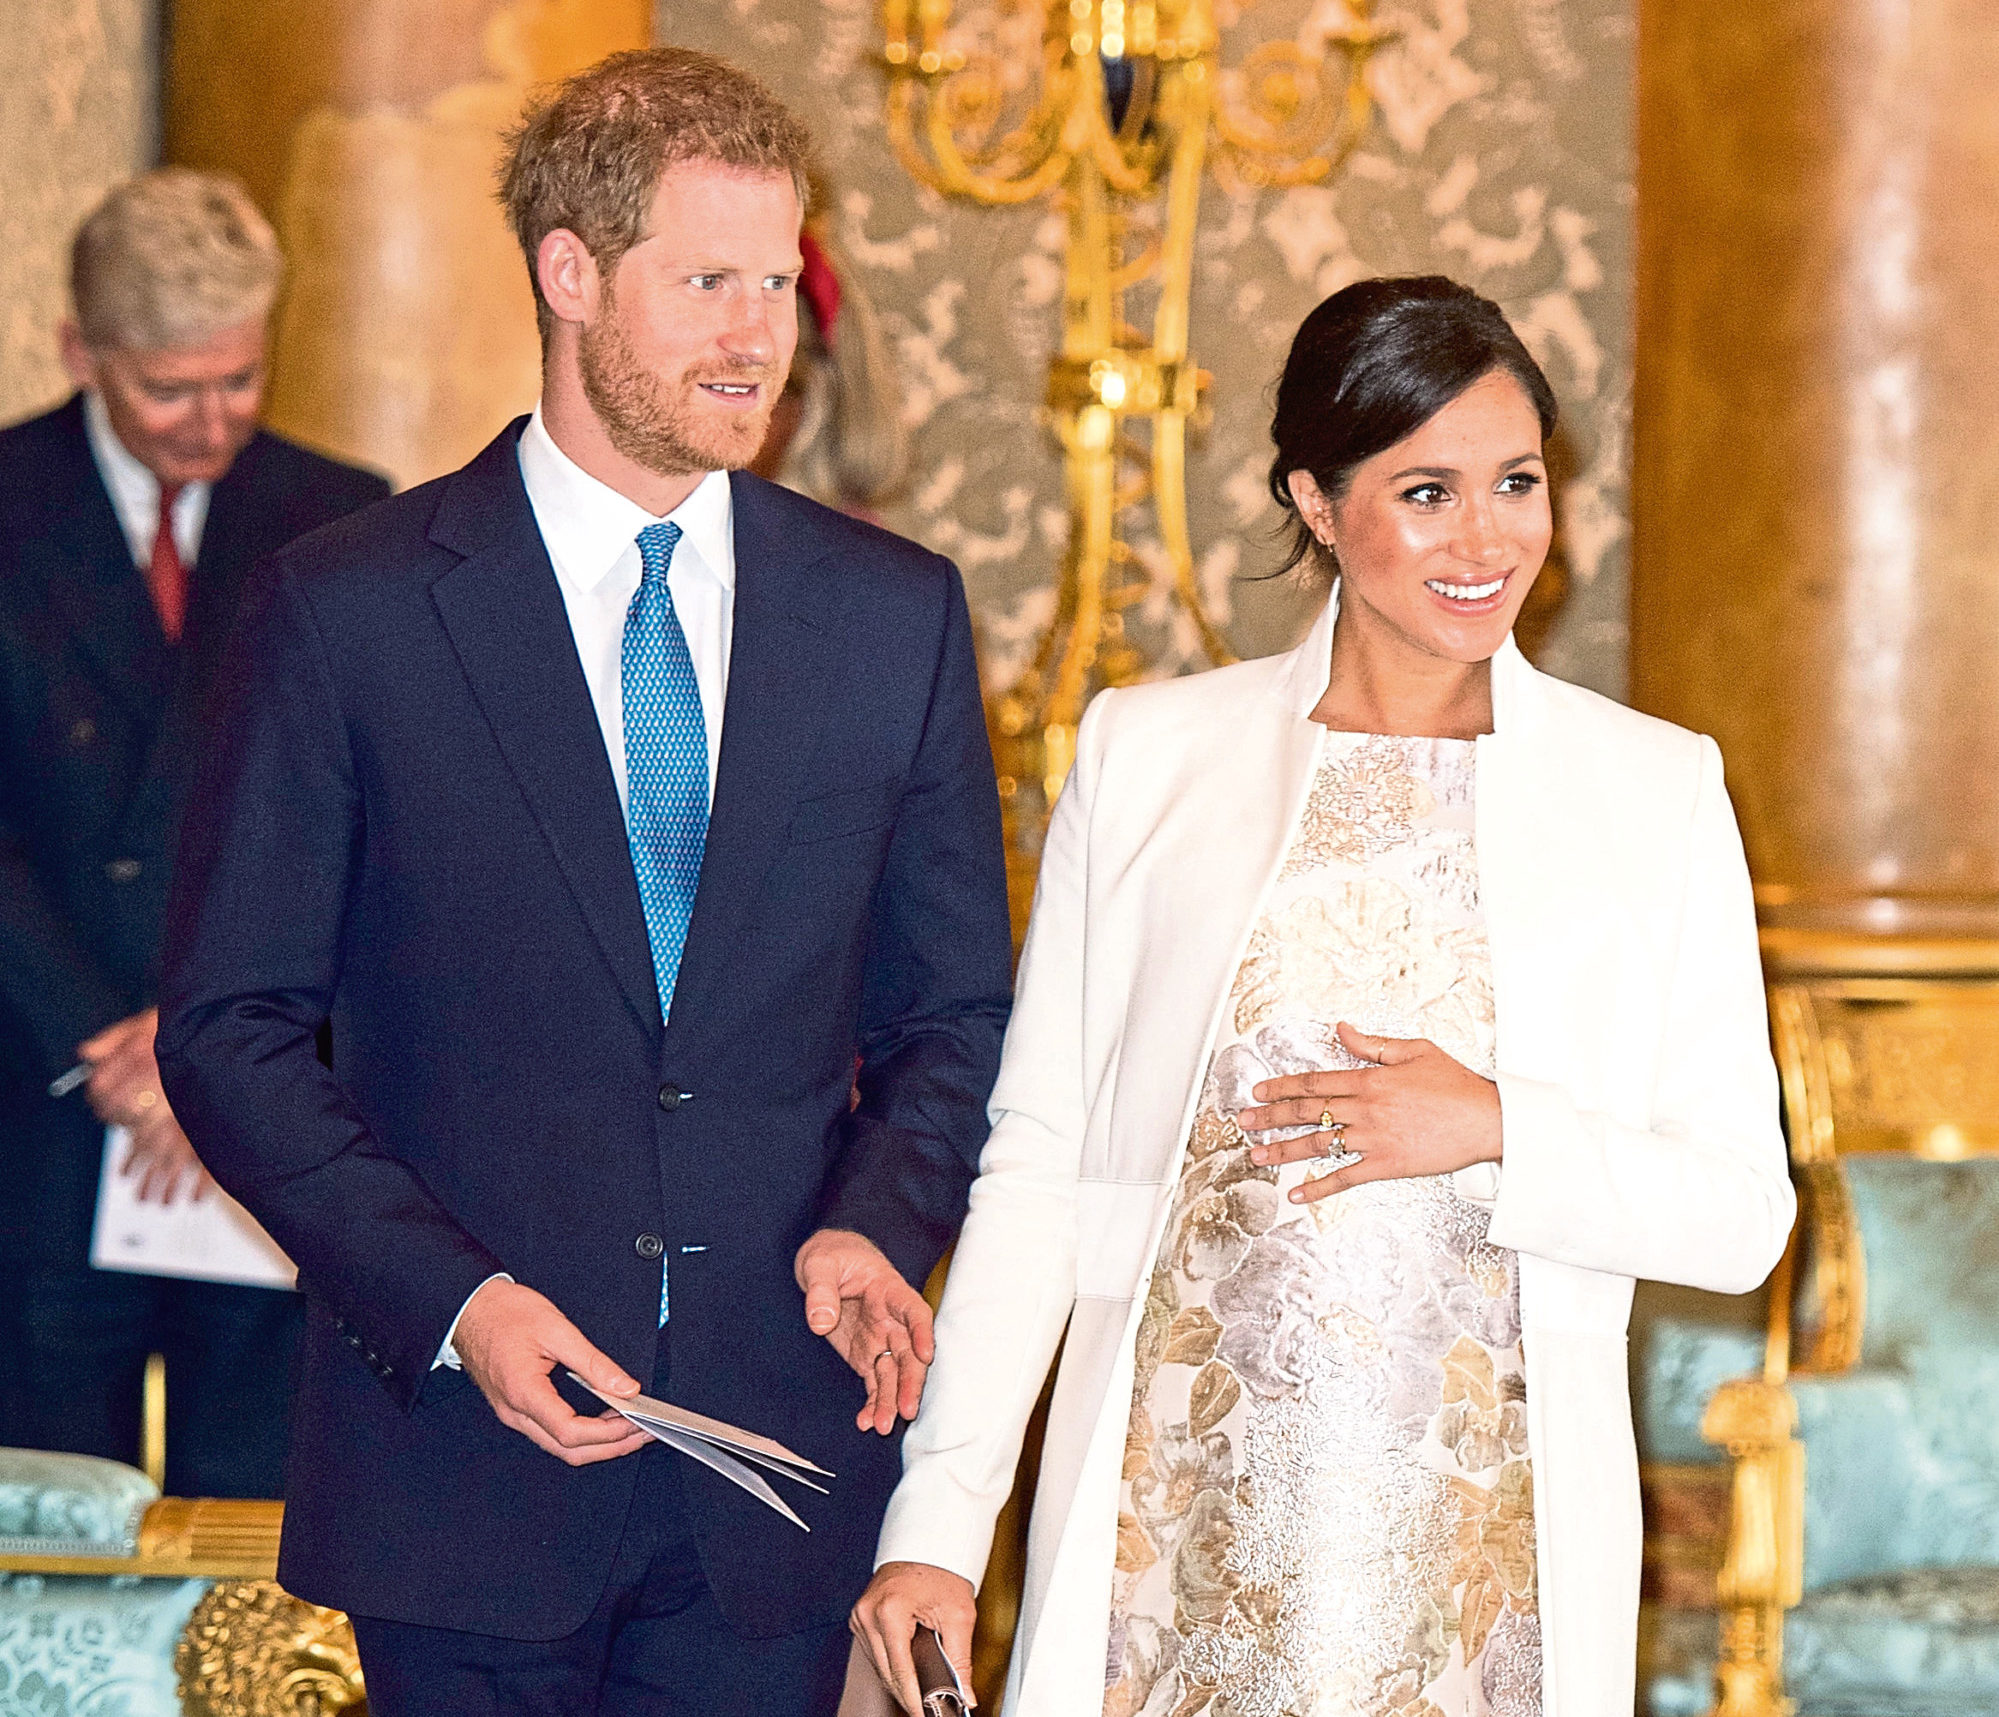 The Duke and Duchess of Sussex attending a reception at Buckingham Palace in London